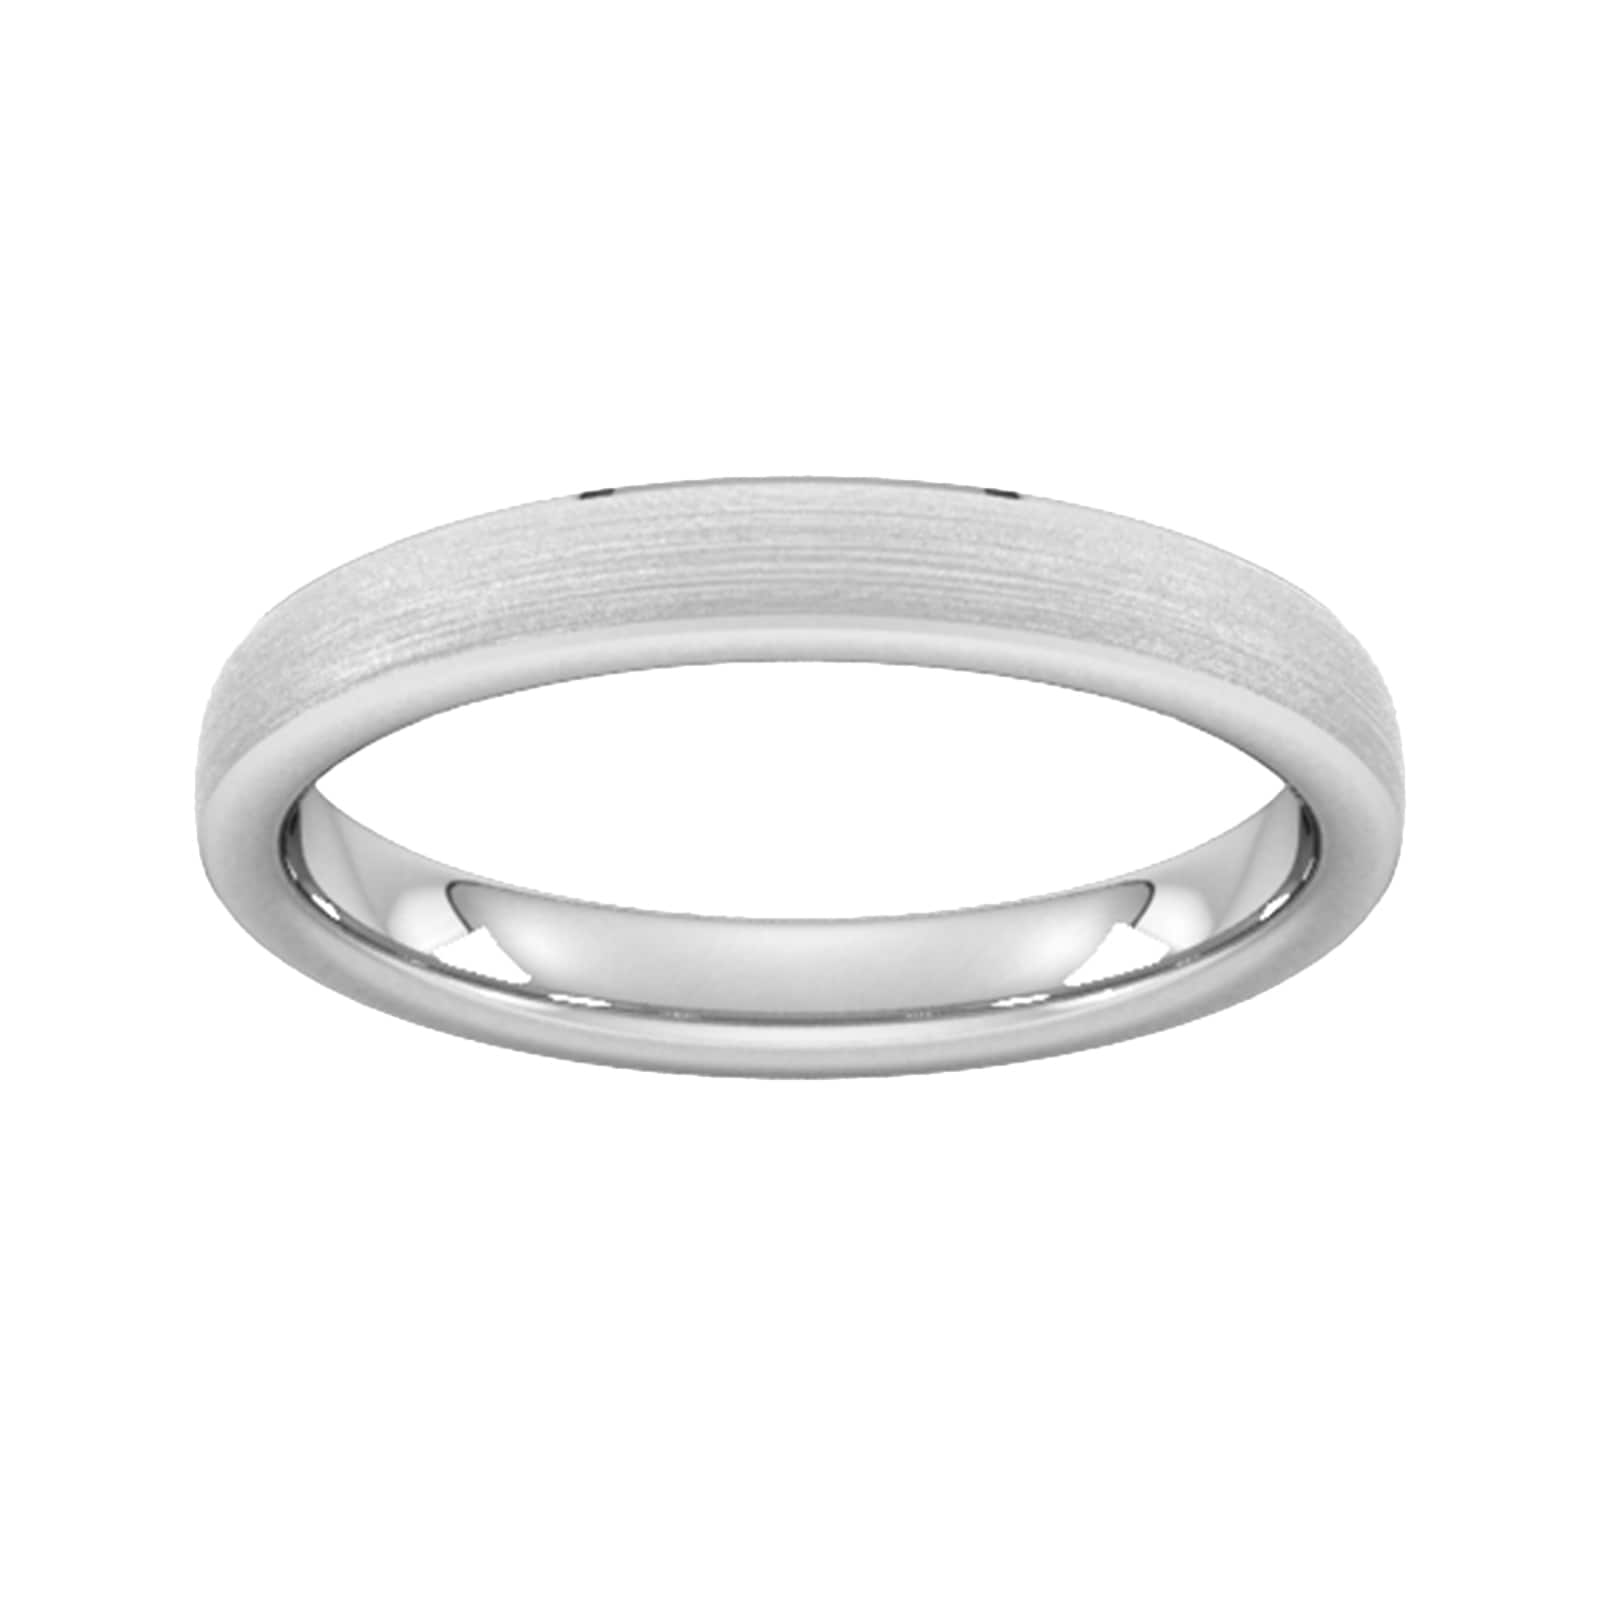 3mm Slight Court Heavy Polished Chamfered Edges With Matt Centre Wedding Ring In 18 Carat White Gold - Ring Size G